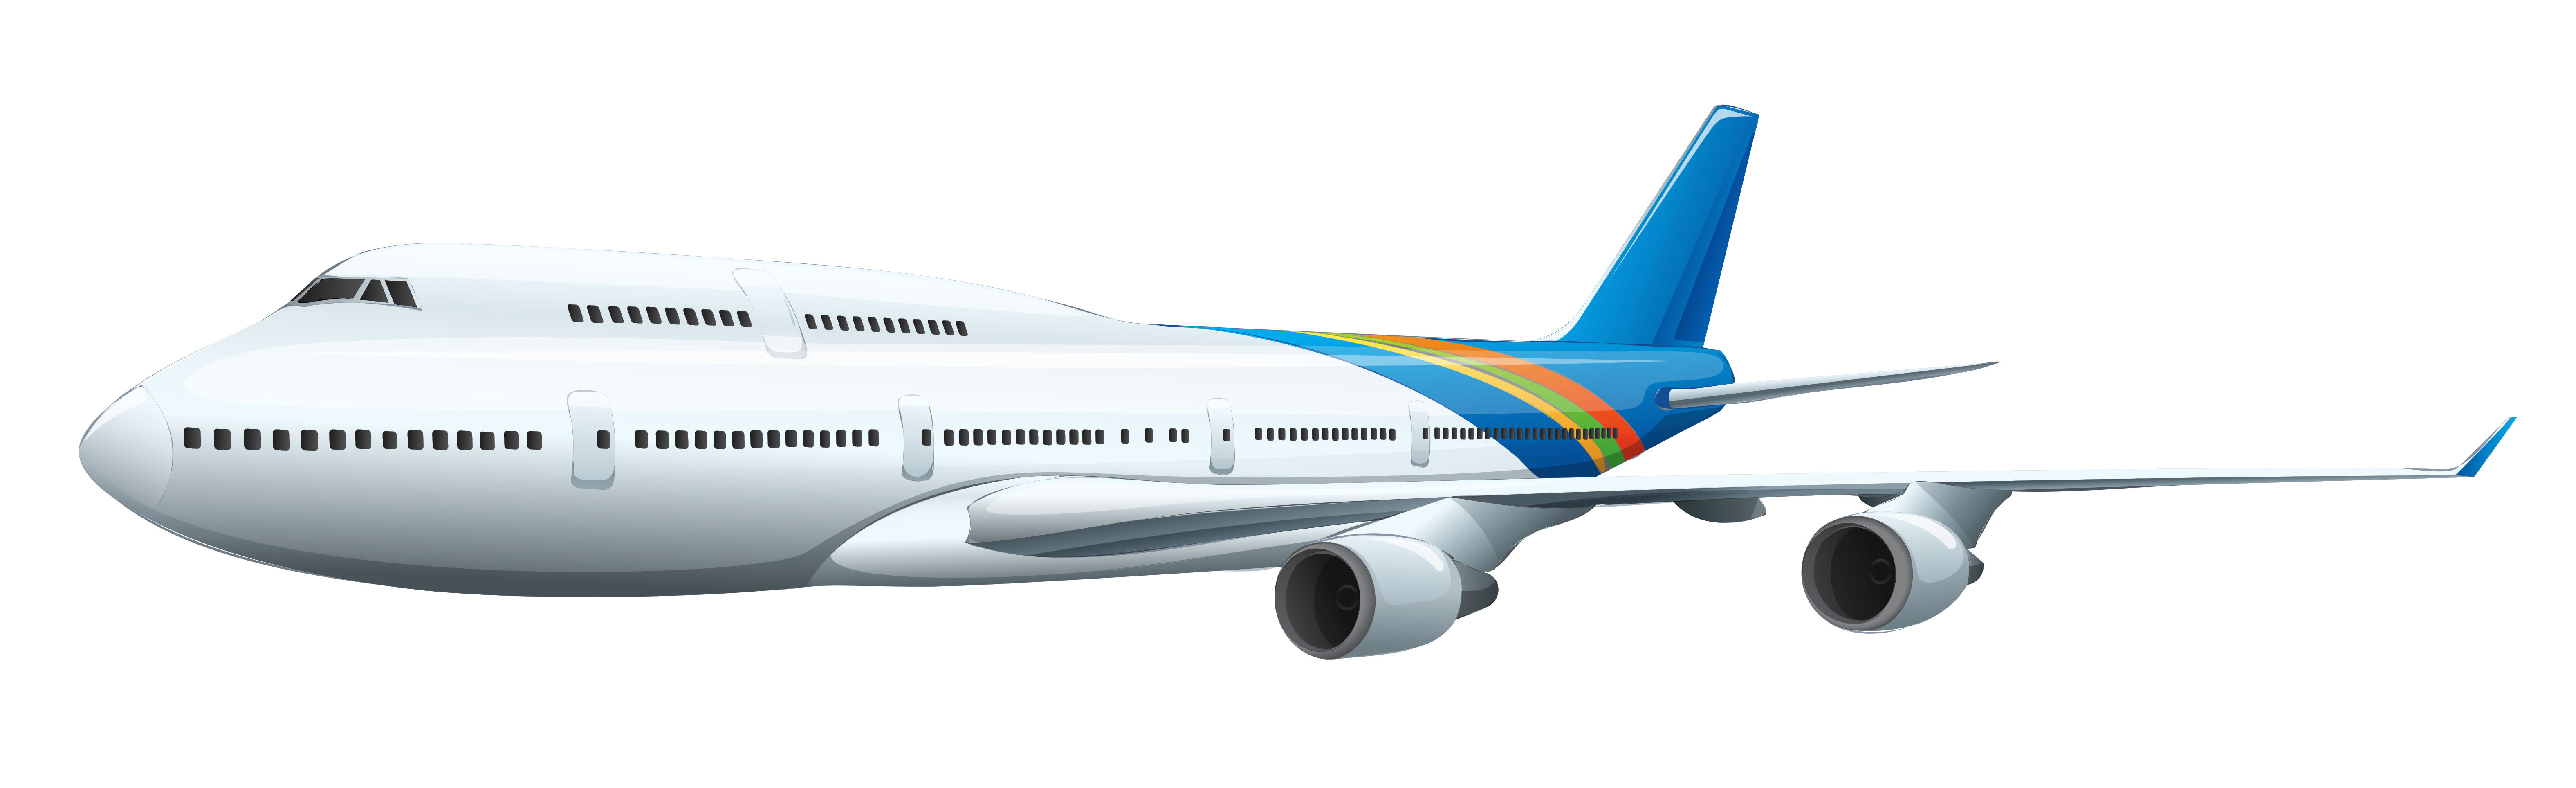 Plane transparent png vector. Flying clipart aviation